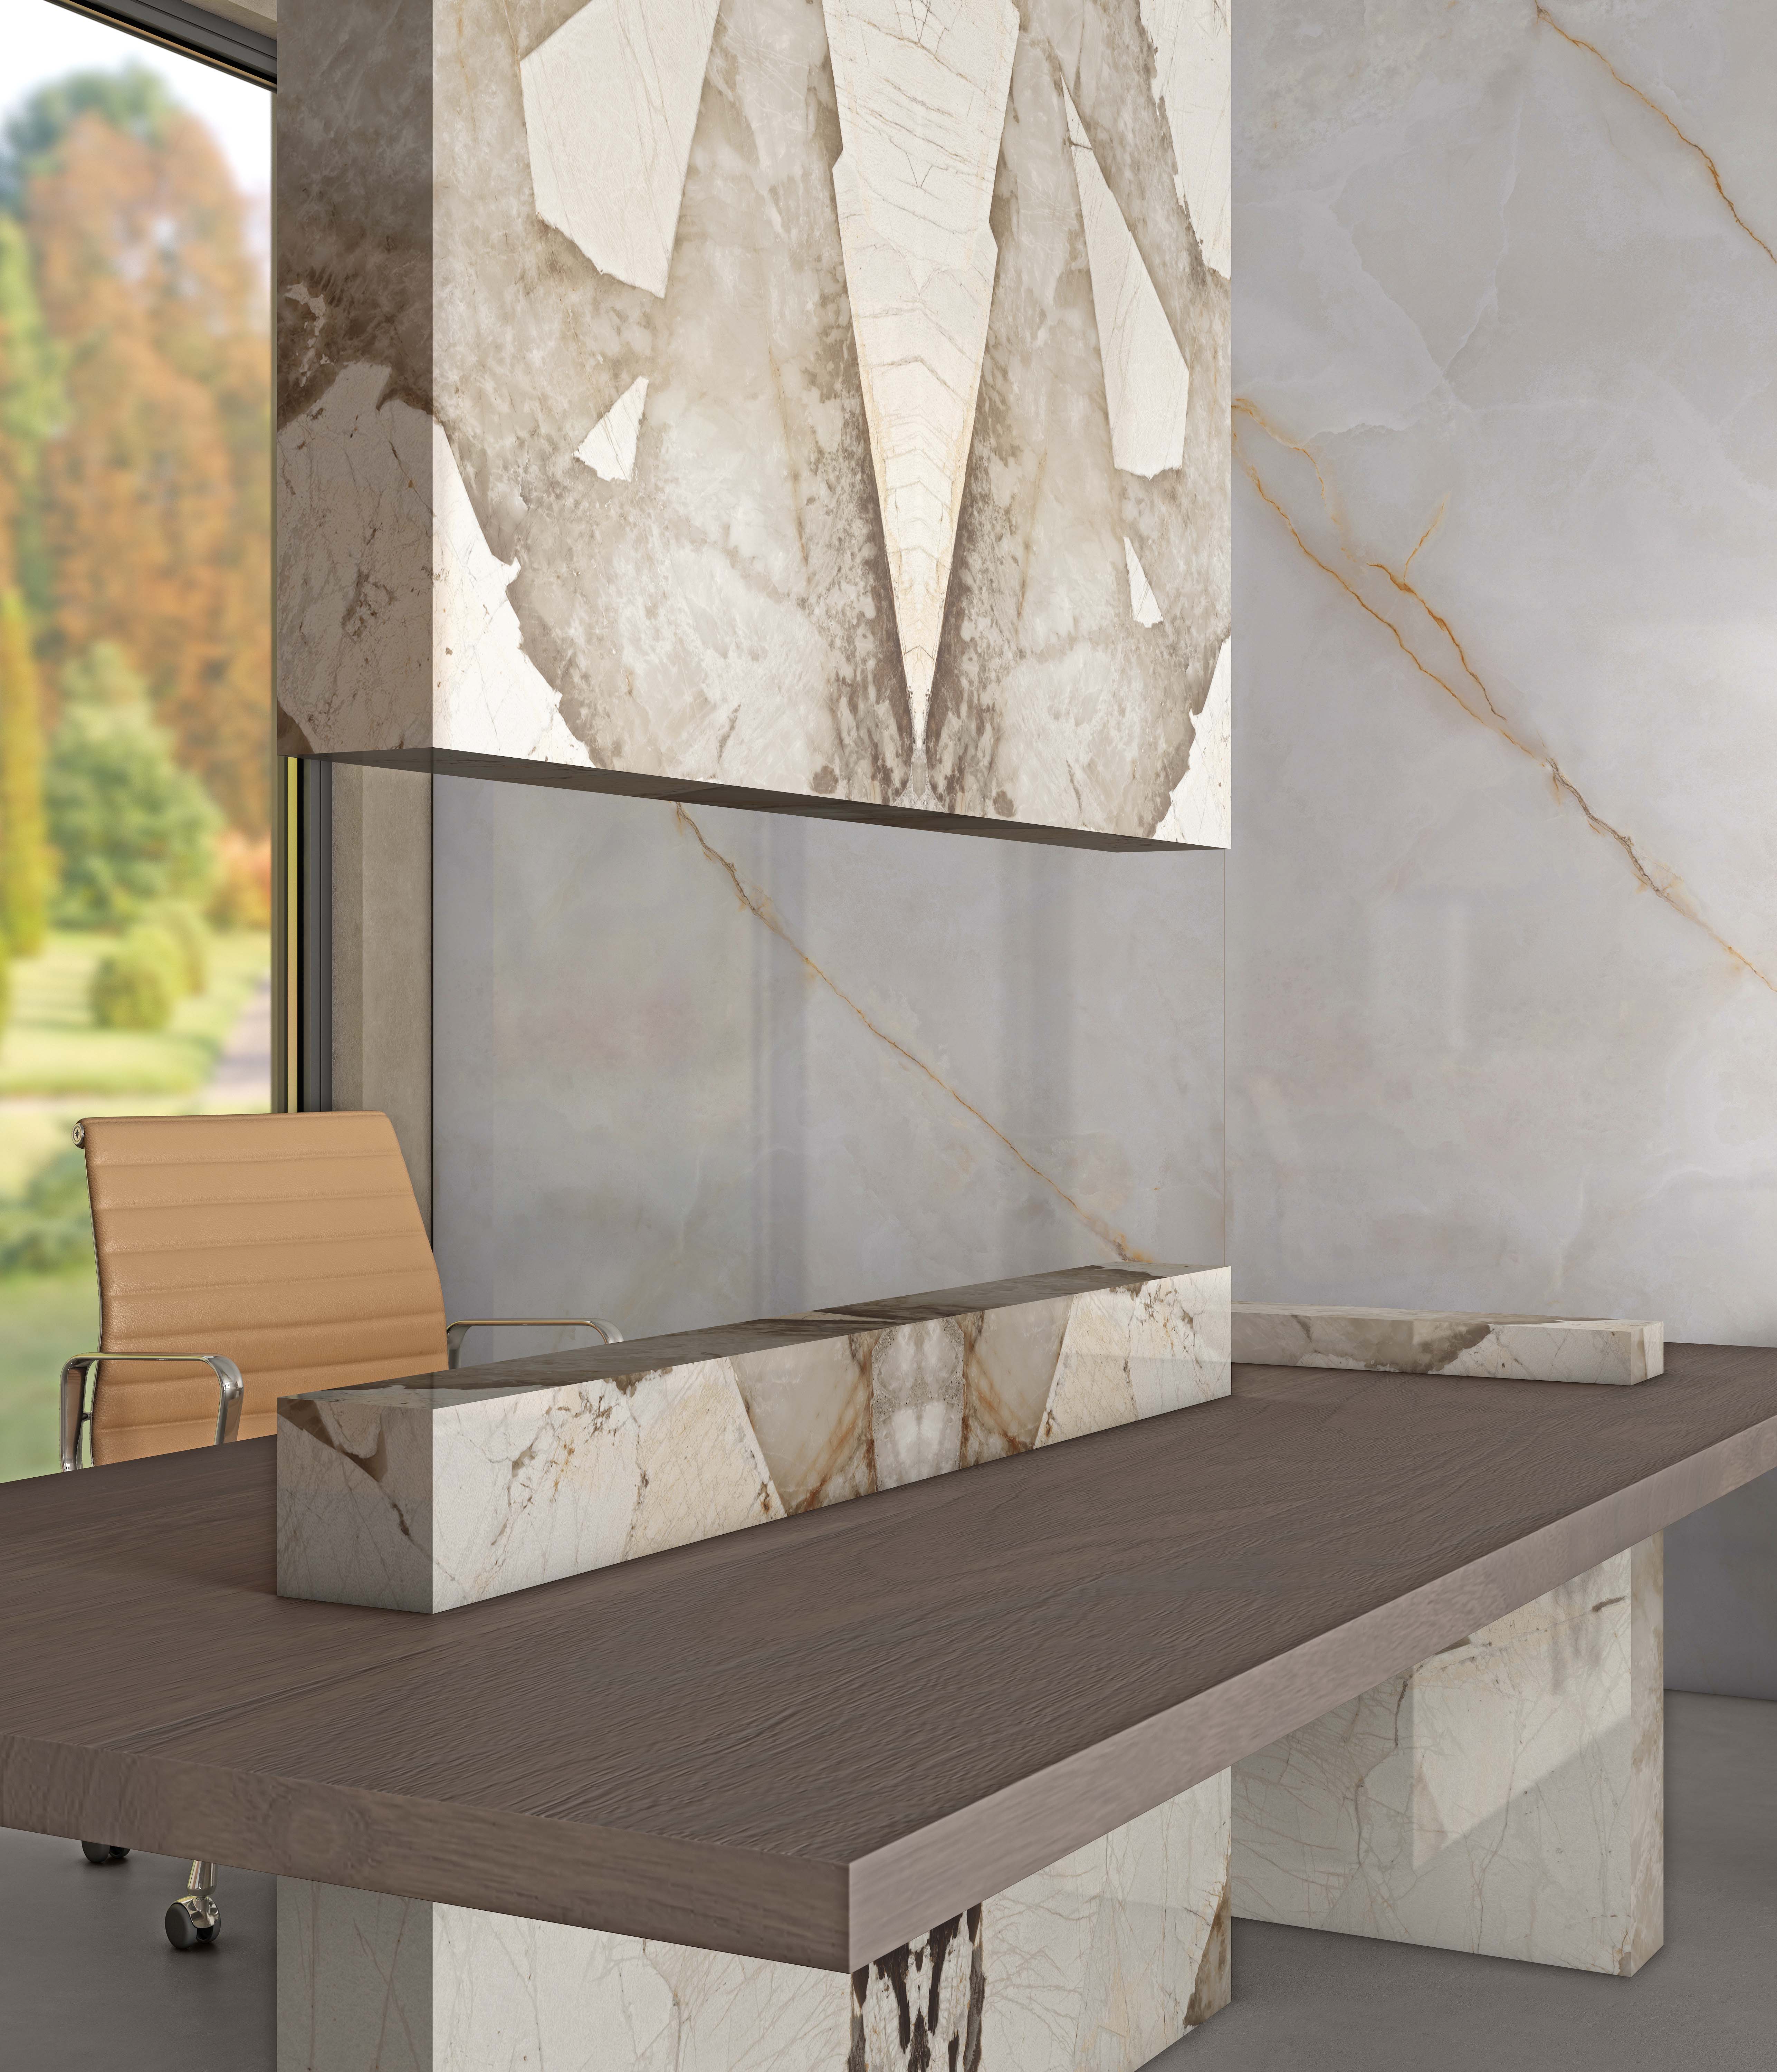 Introducing Lamar. An impressive collection of quality porcelain surfaces, available from Blackheath.